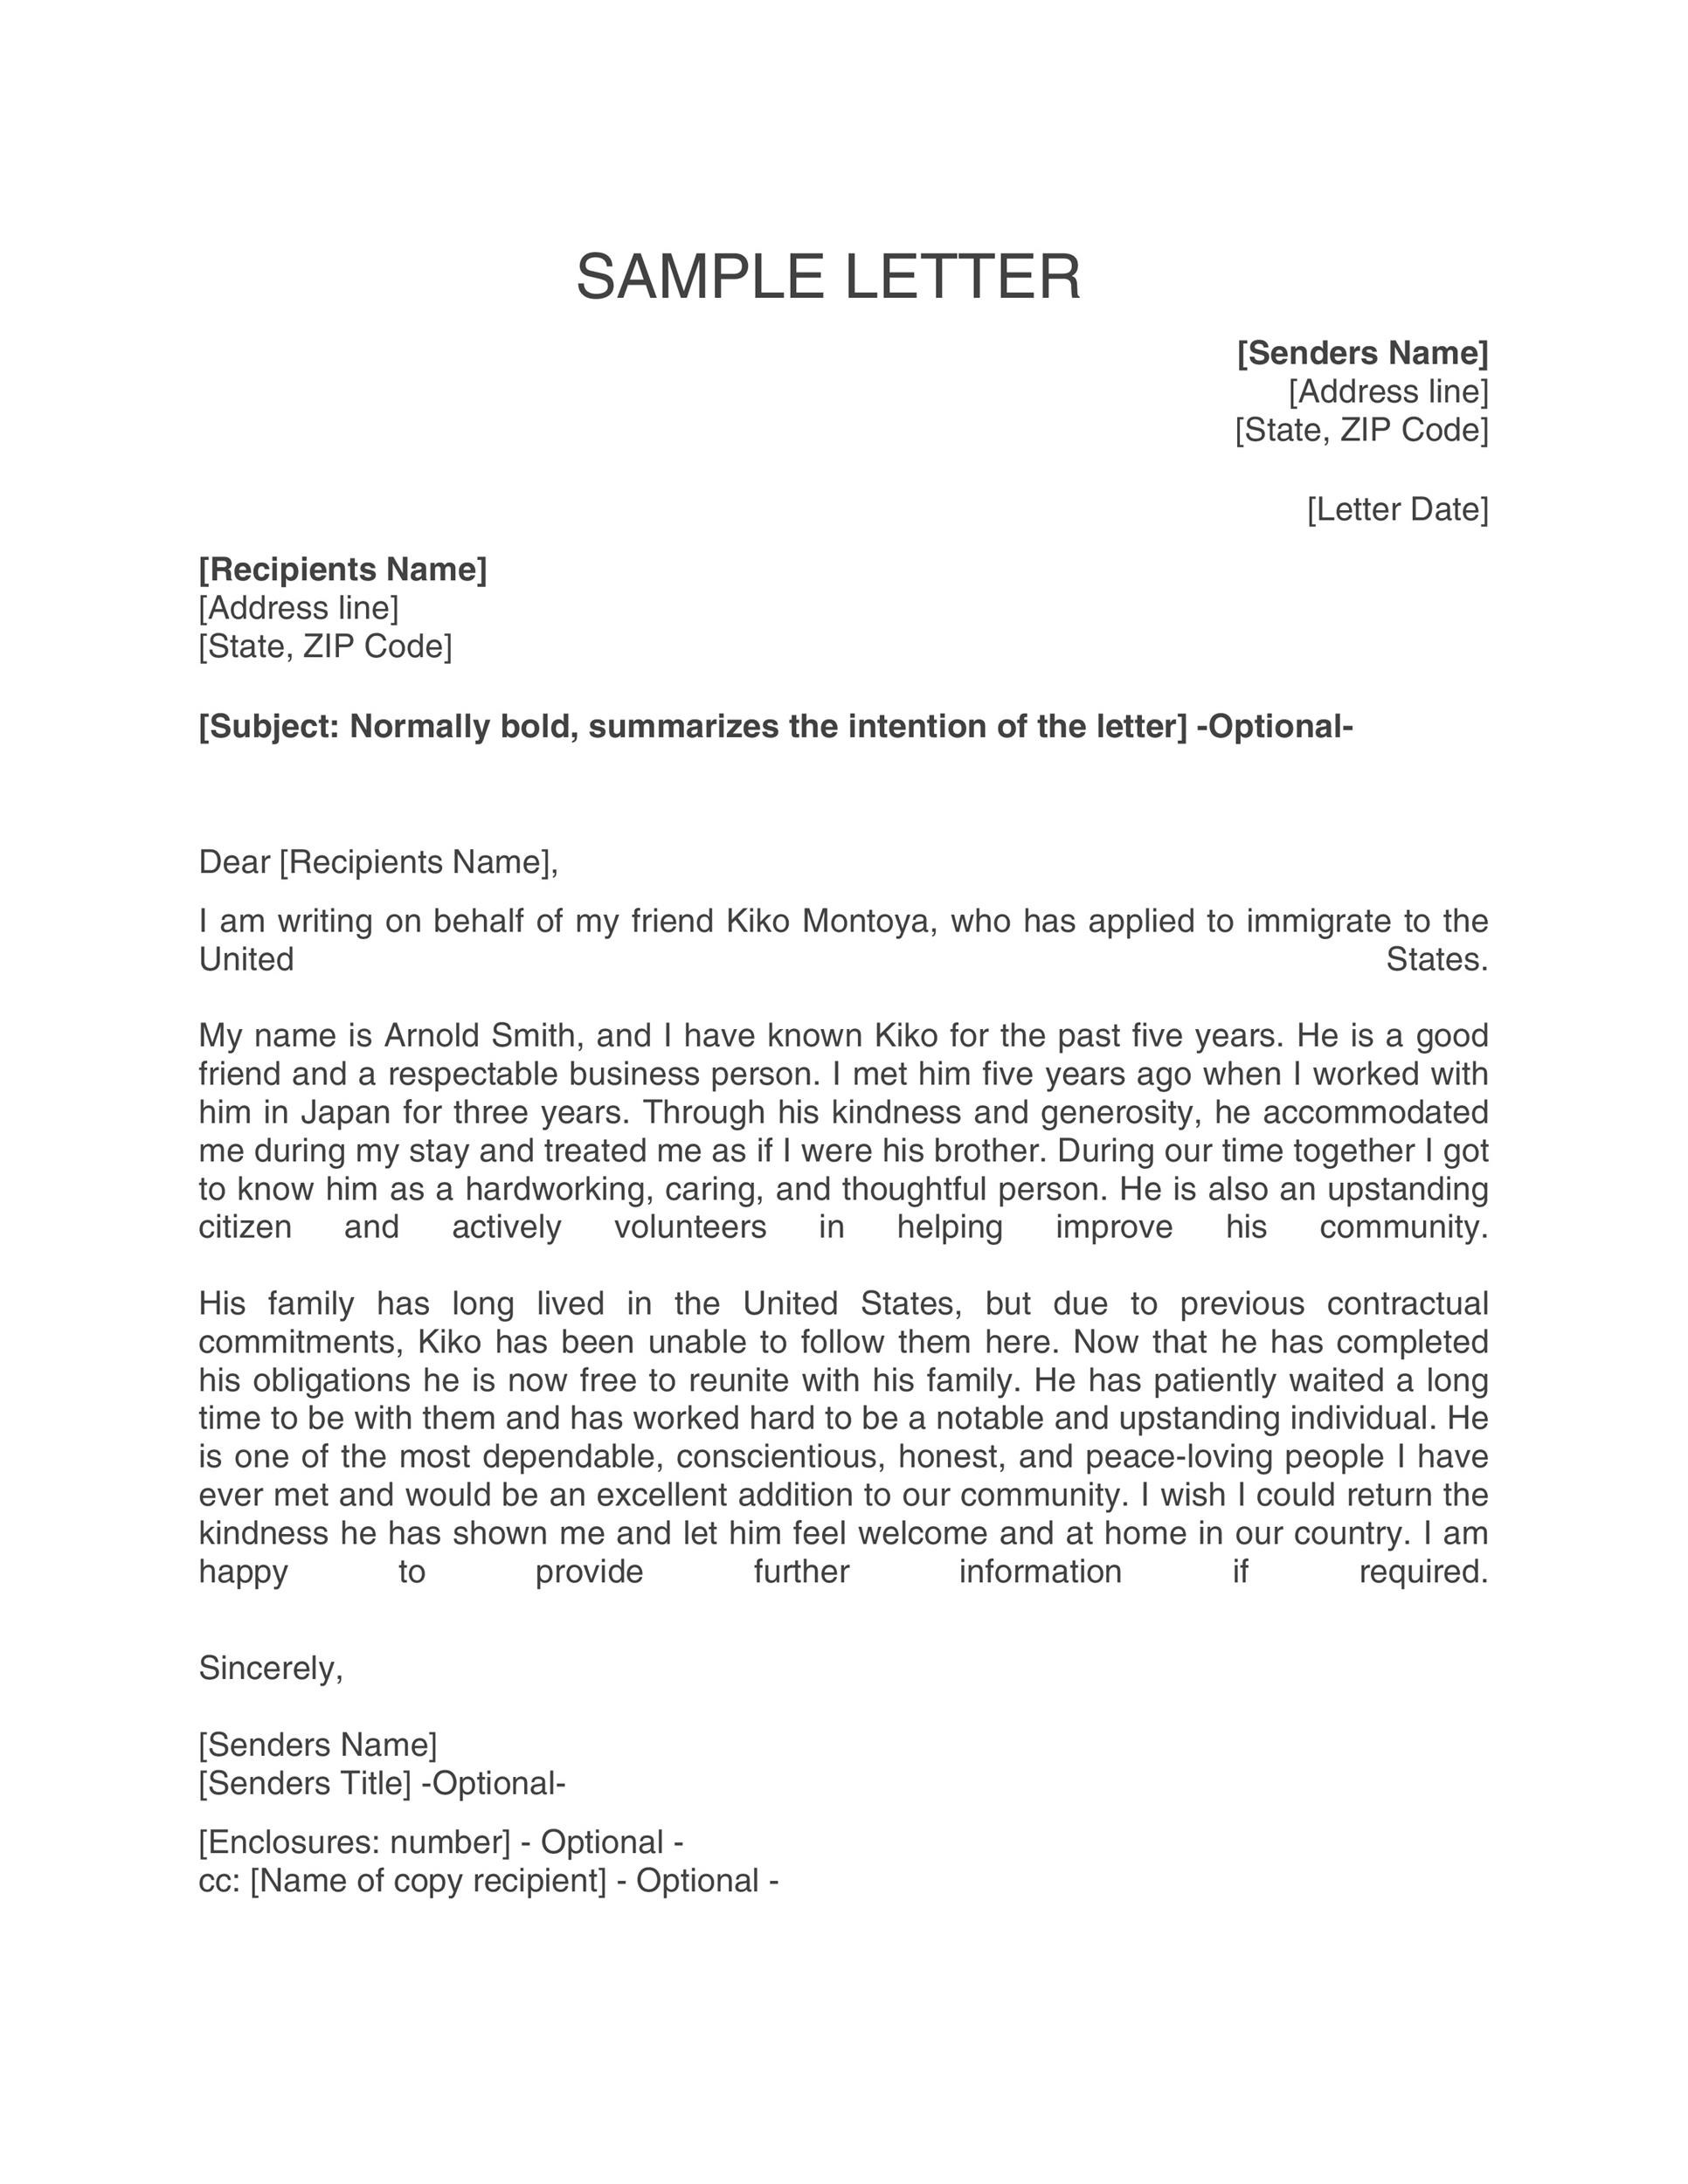 Example Of Character Letter For Immigration from templatelab.com